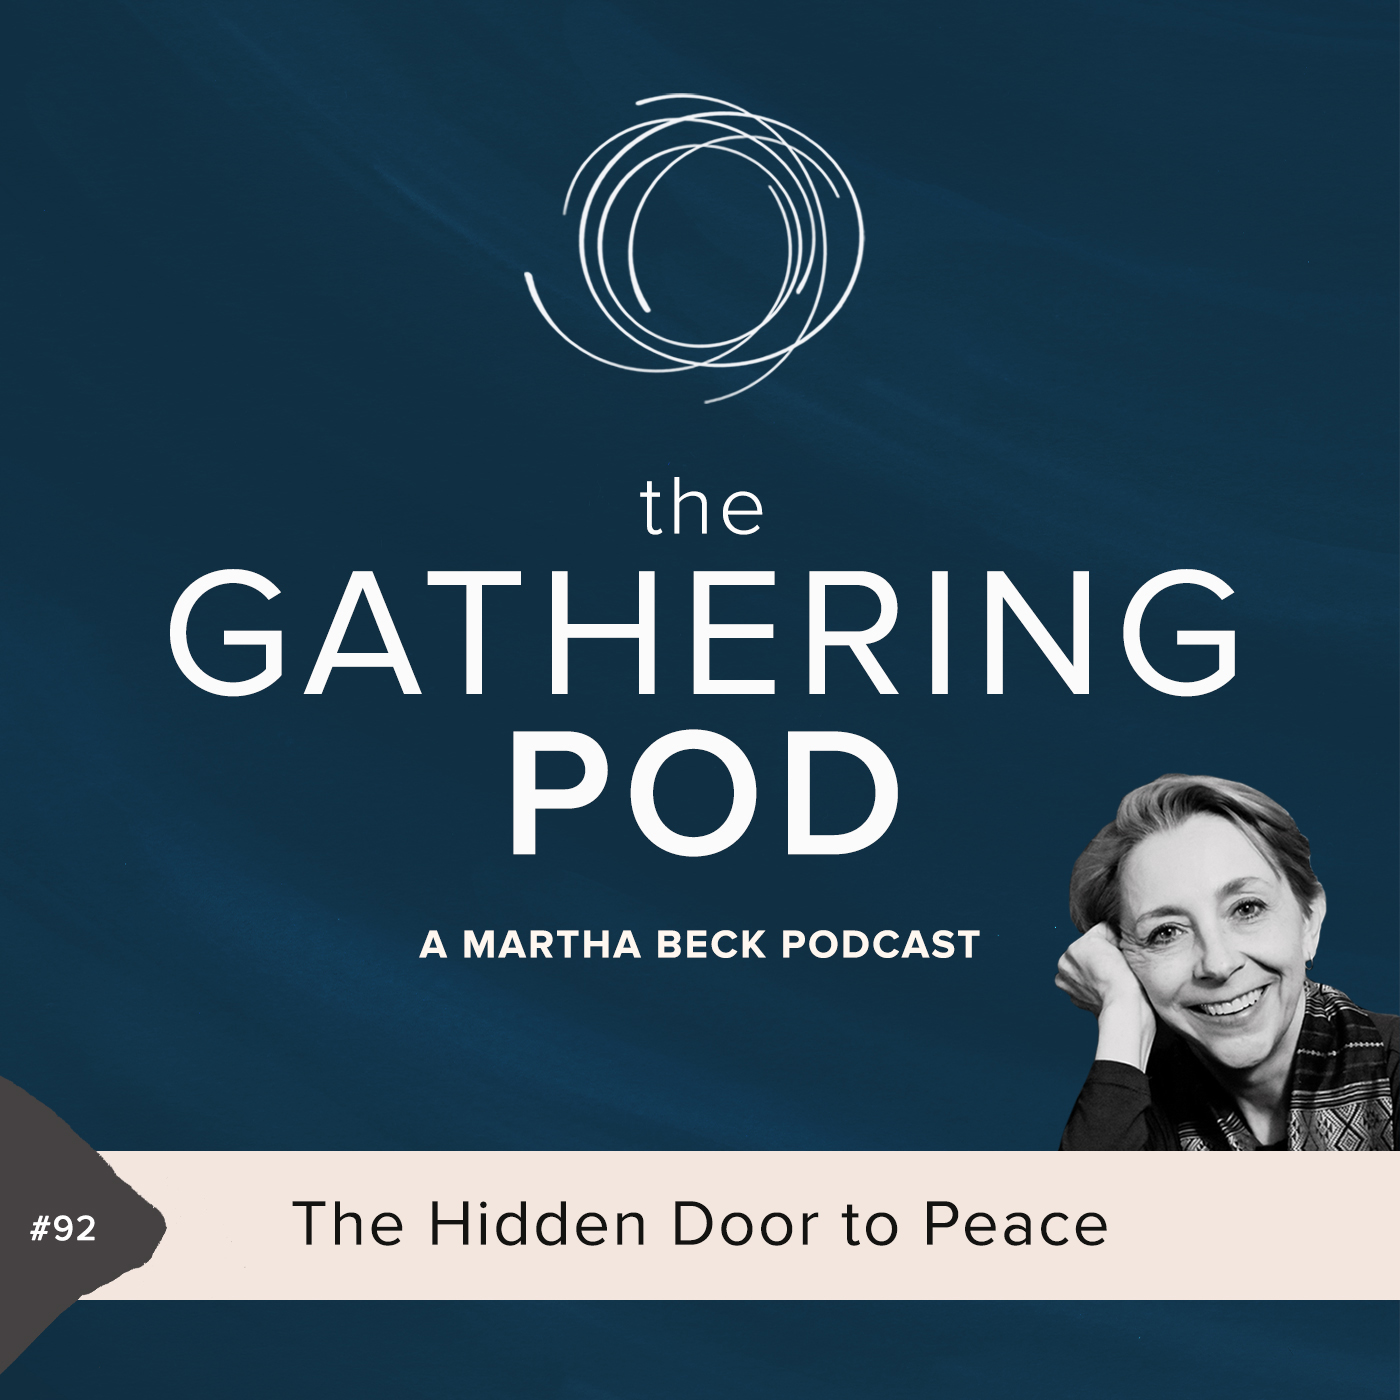 Image for The Gathering Pod A Martha Beck Podcast Episode #92 The Hidden Door to Peace